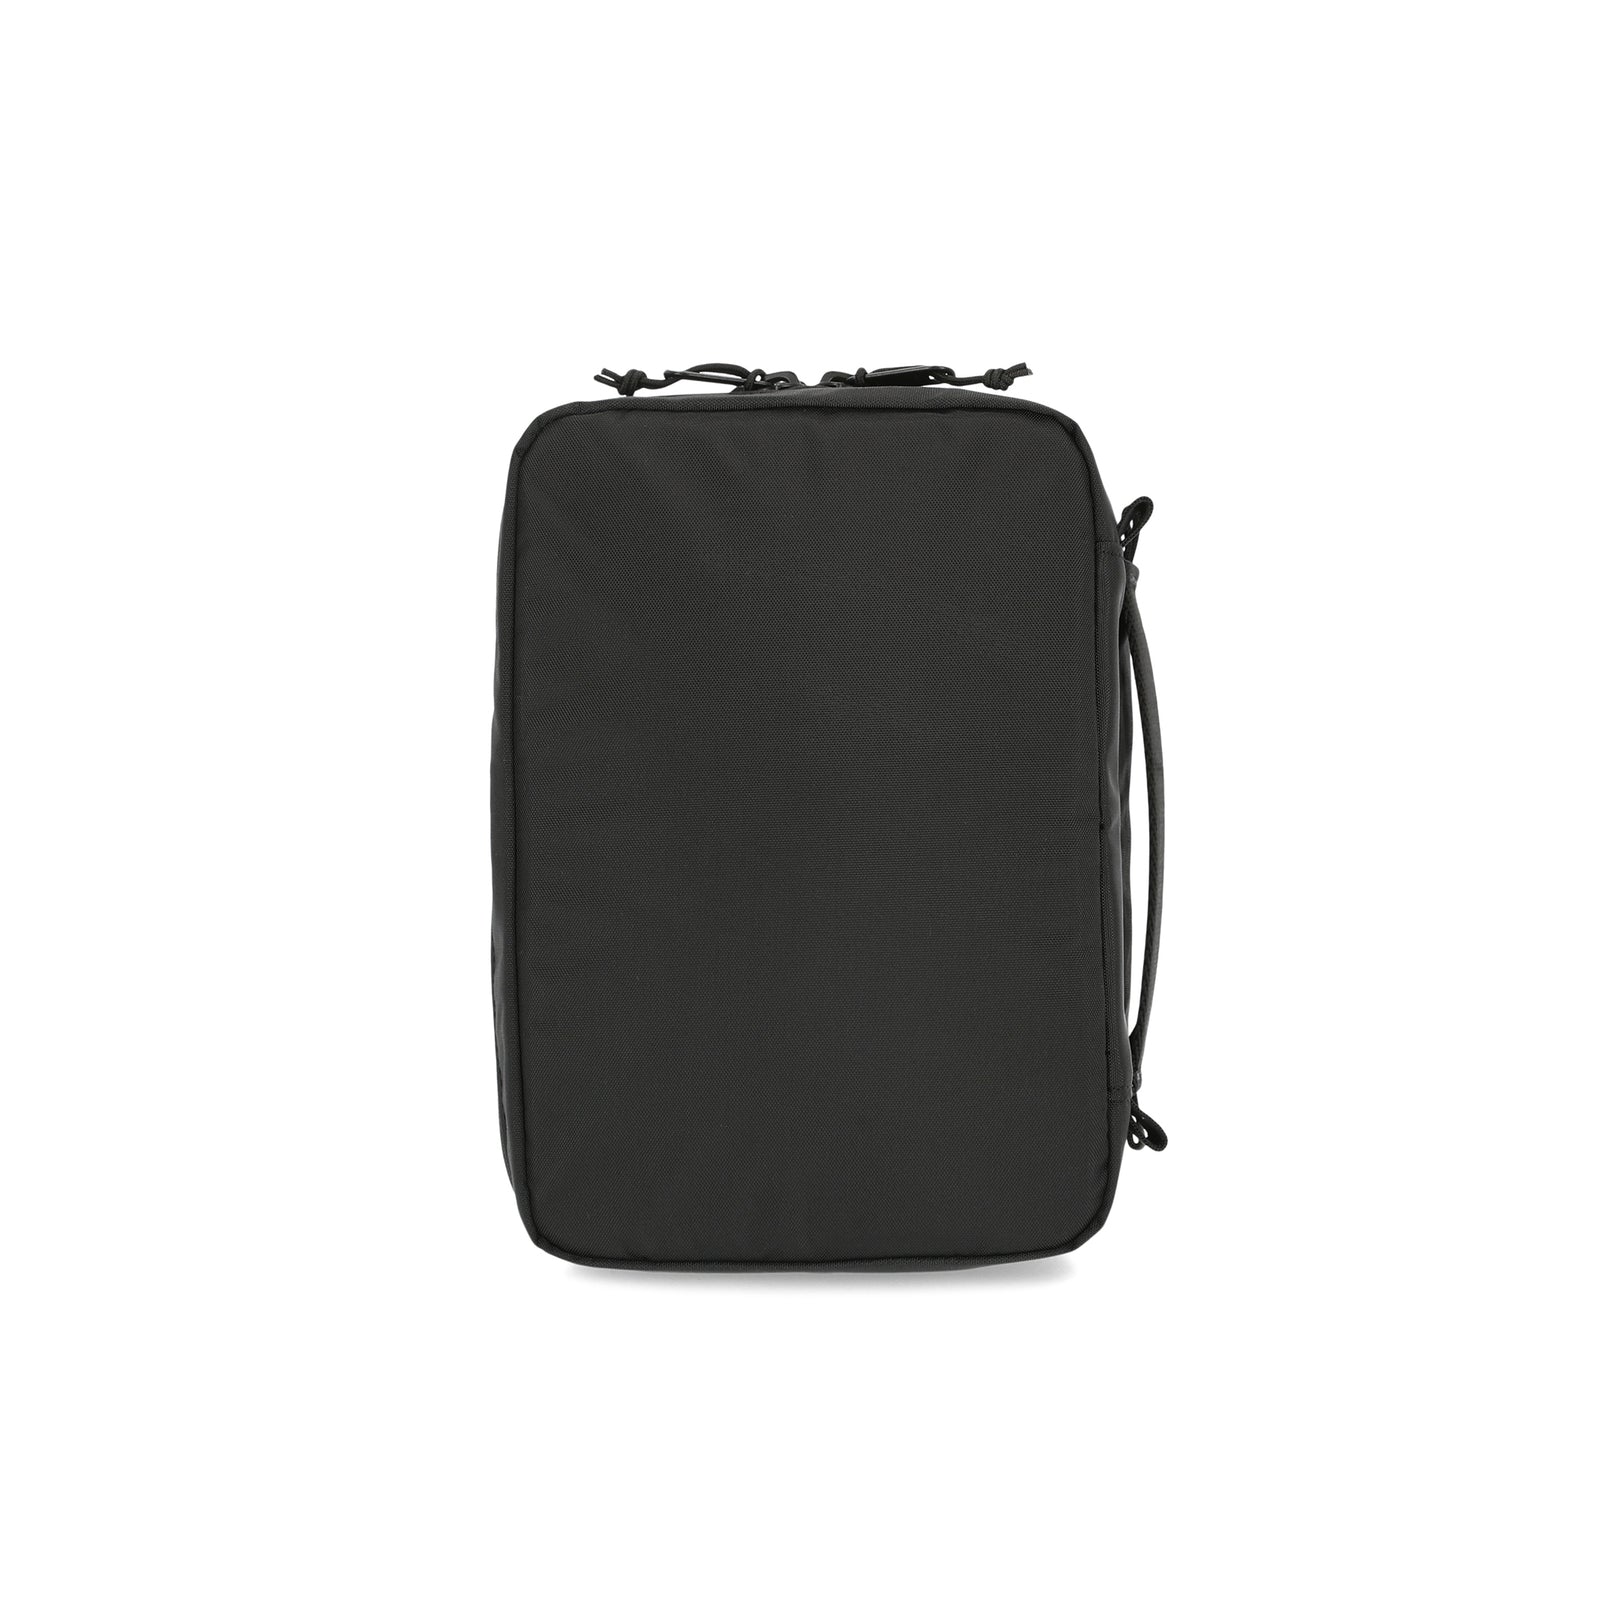 General back shot of Topo Designs Tech electronics organization travel Case in black recycled nylon.